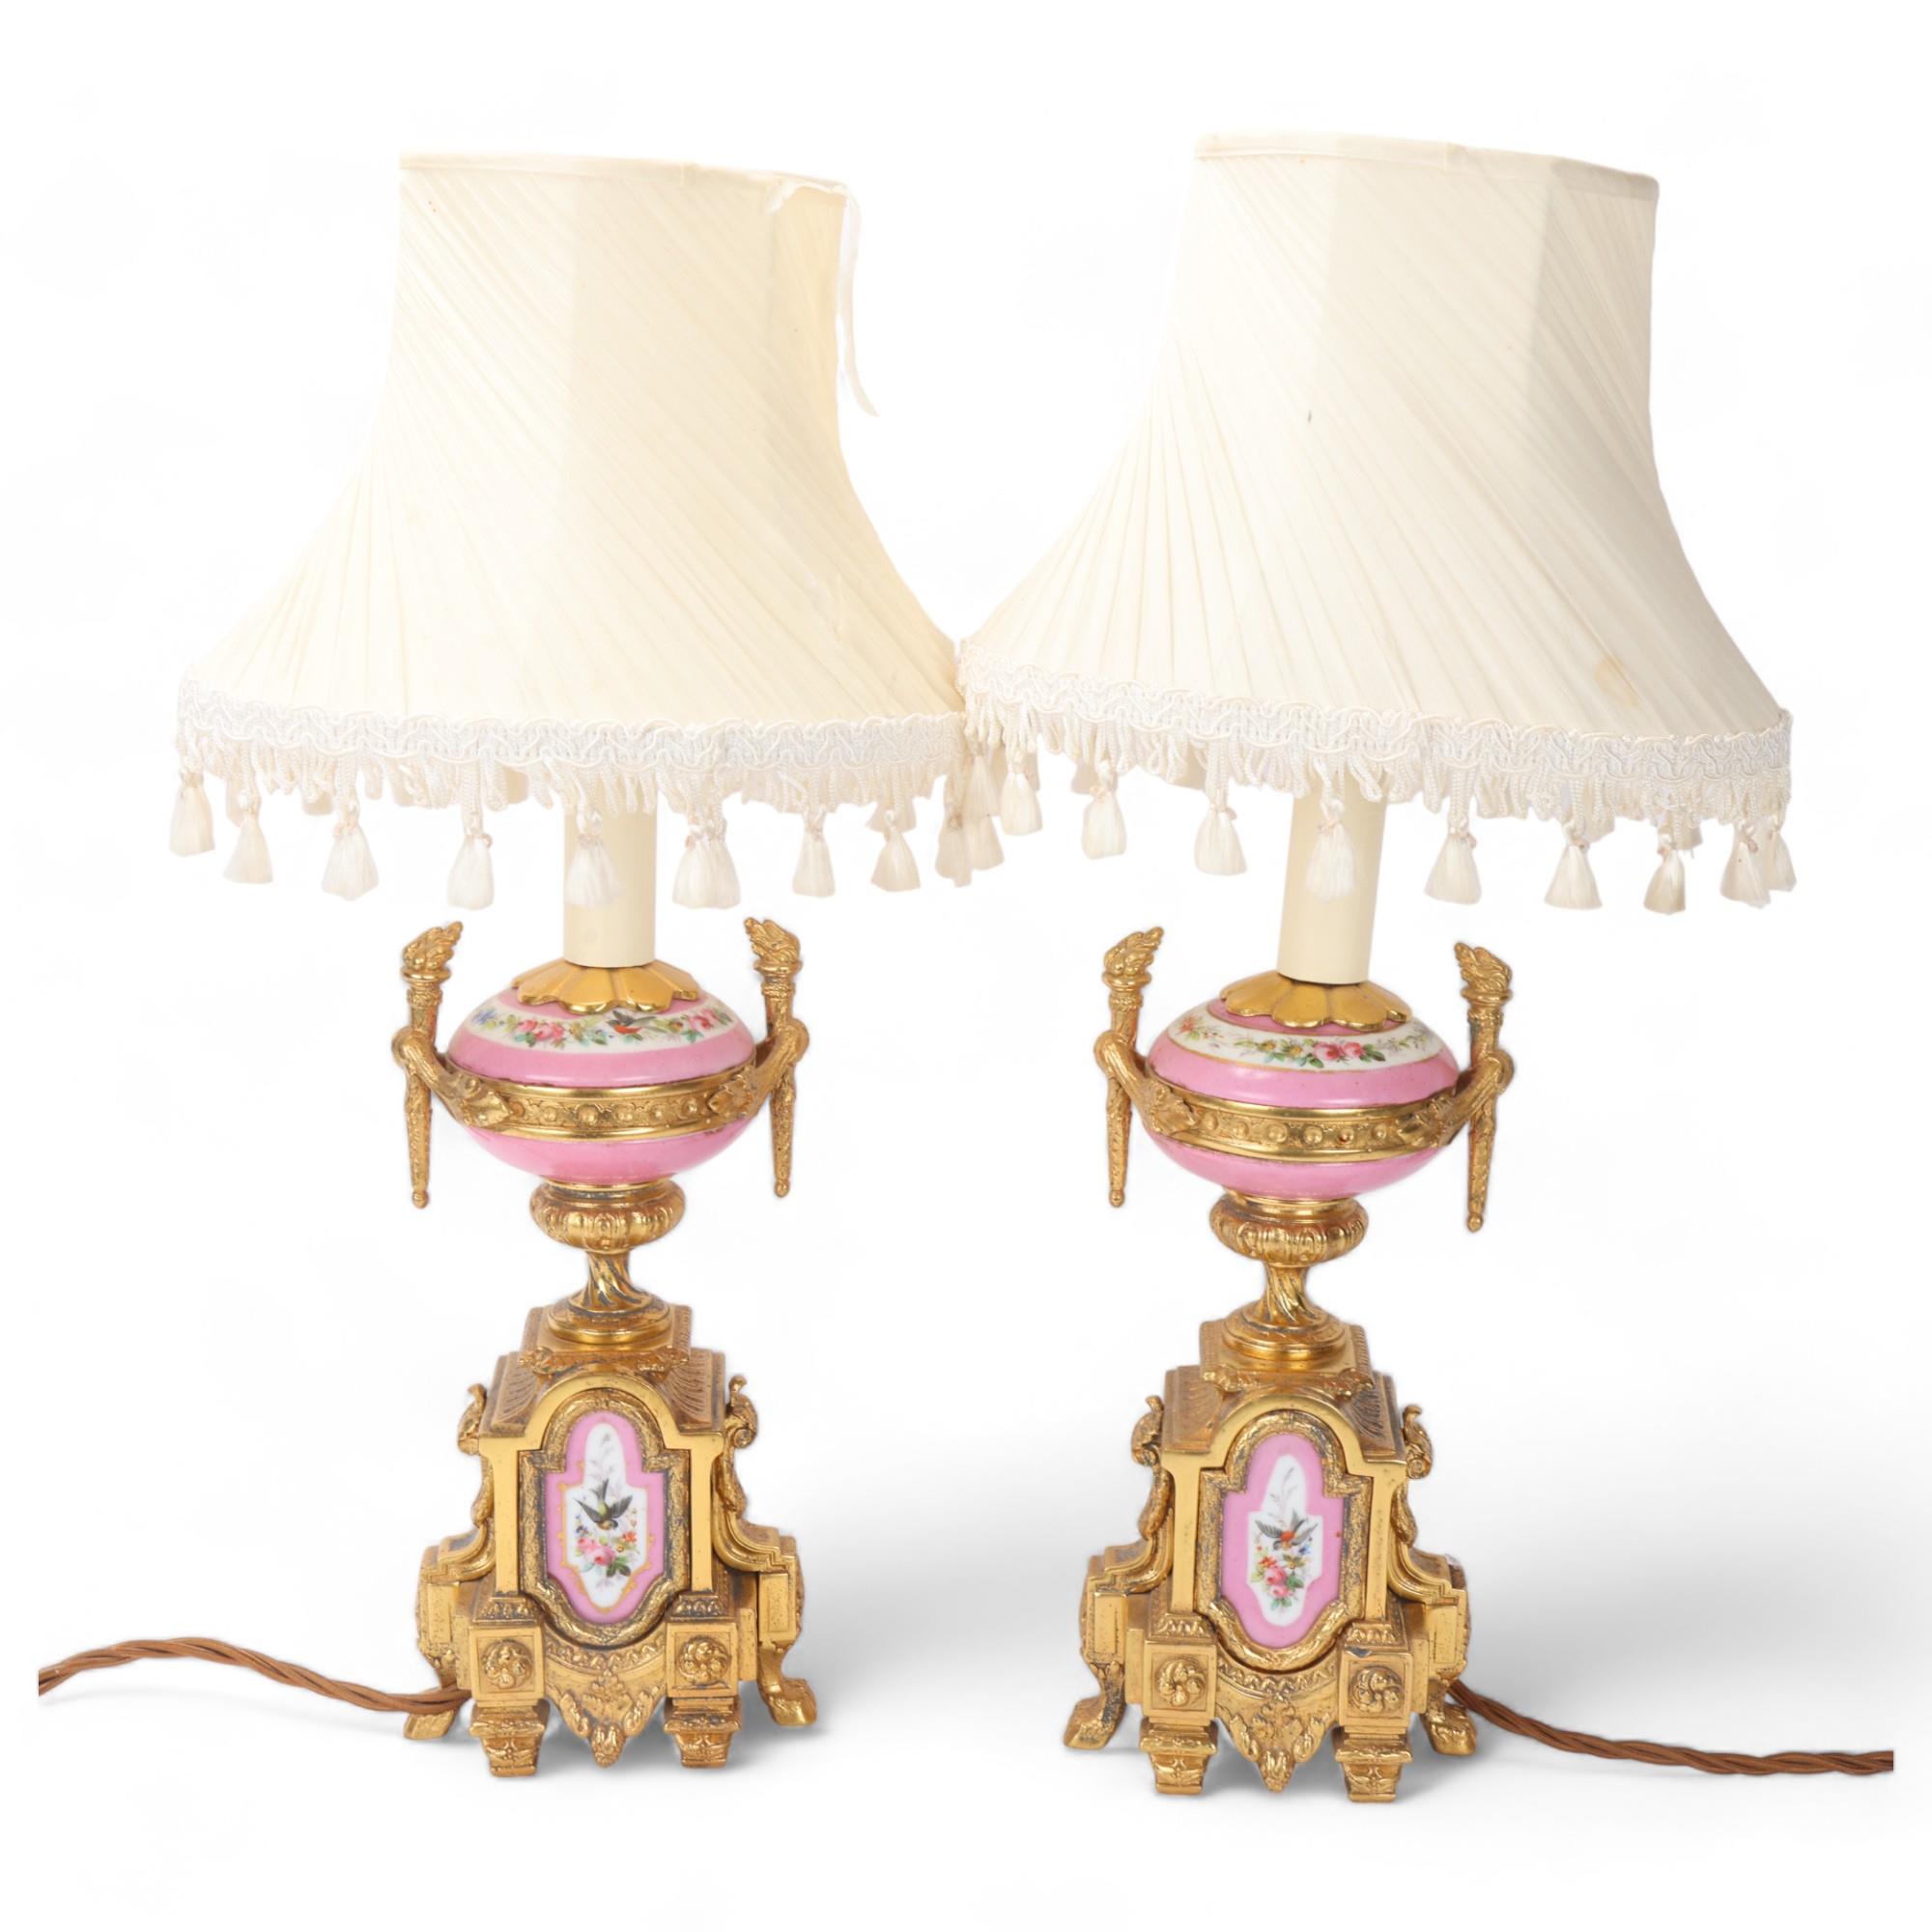 Pair of French ormolu and porcelain table lamps, circa 1900, with hand painted panels depicting